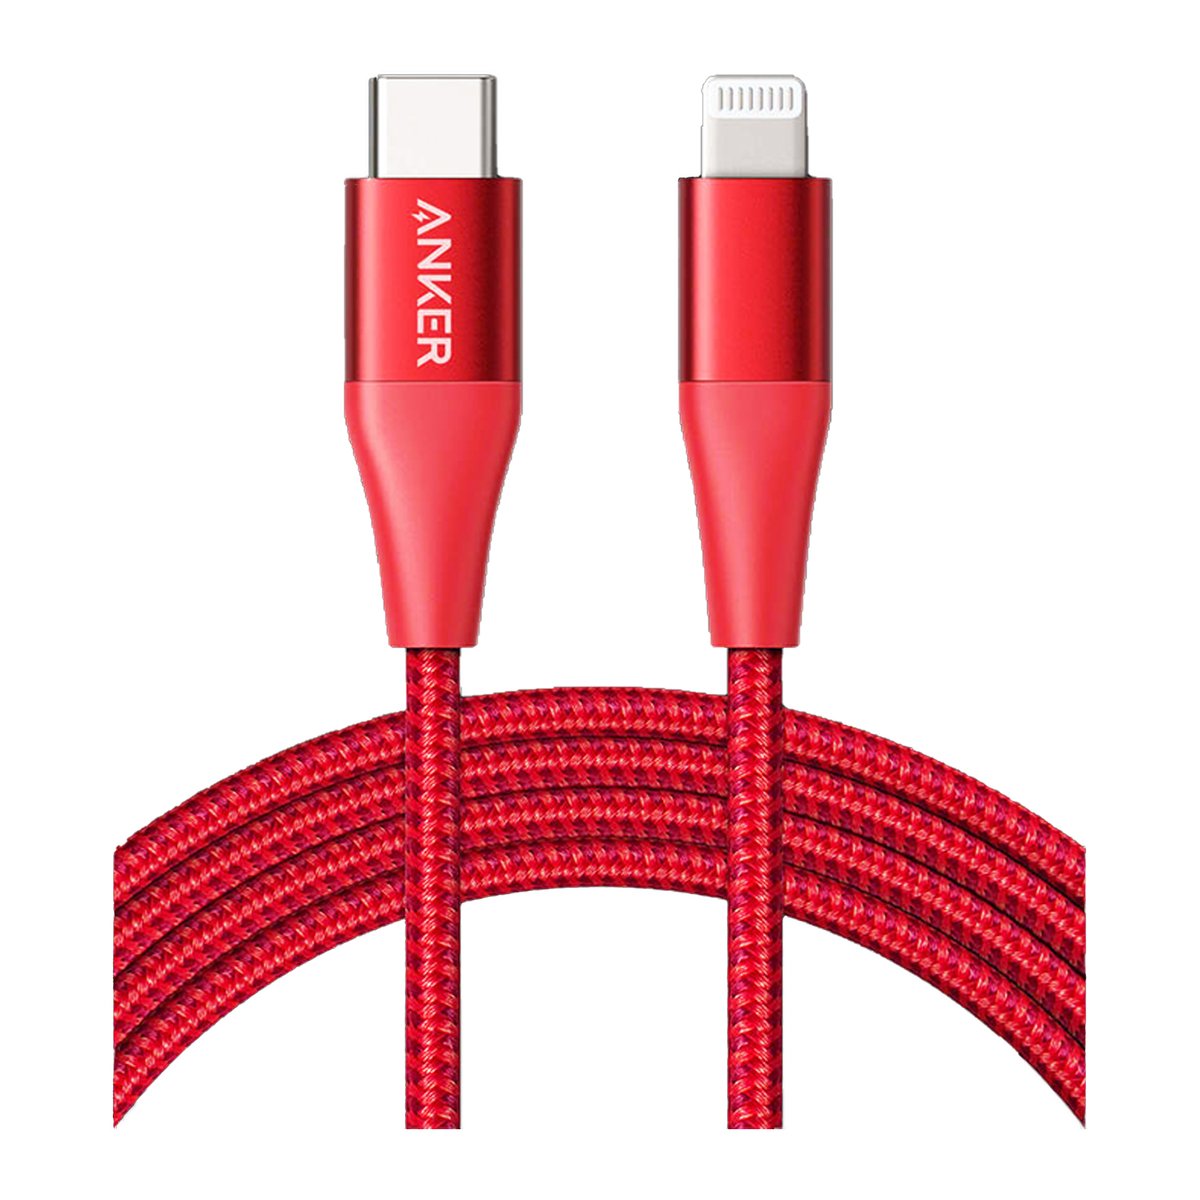 Anker PowerLine+ II USB-C to Lightning Cable A8653H91 Red 1.8mtr